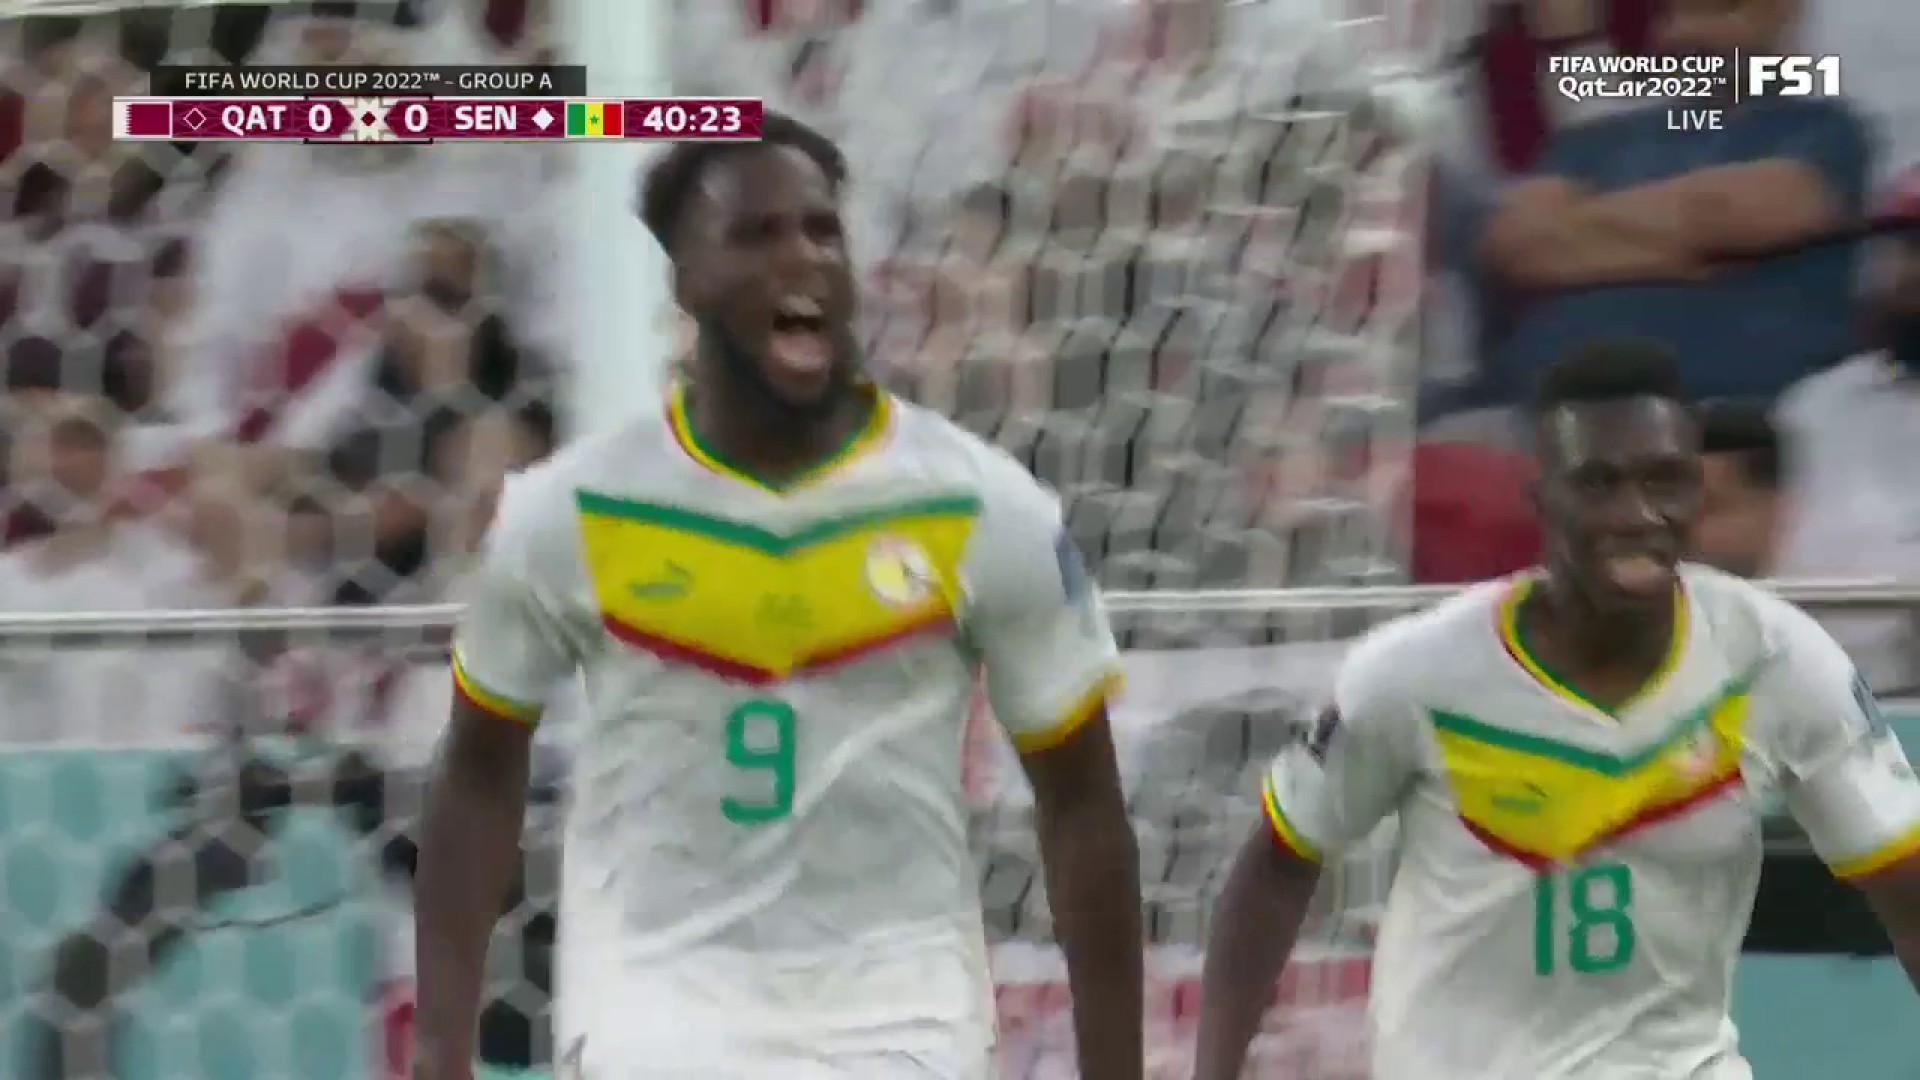 DIA SCORES SENEGAL'S FIRST GOAL OF THE 2022 FIFA WORLD CUP 🇸🇳”